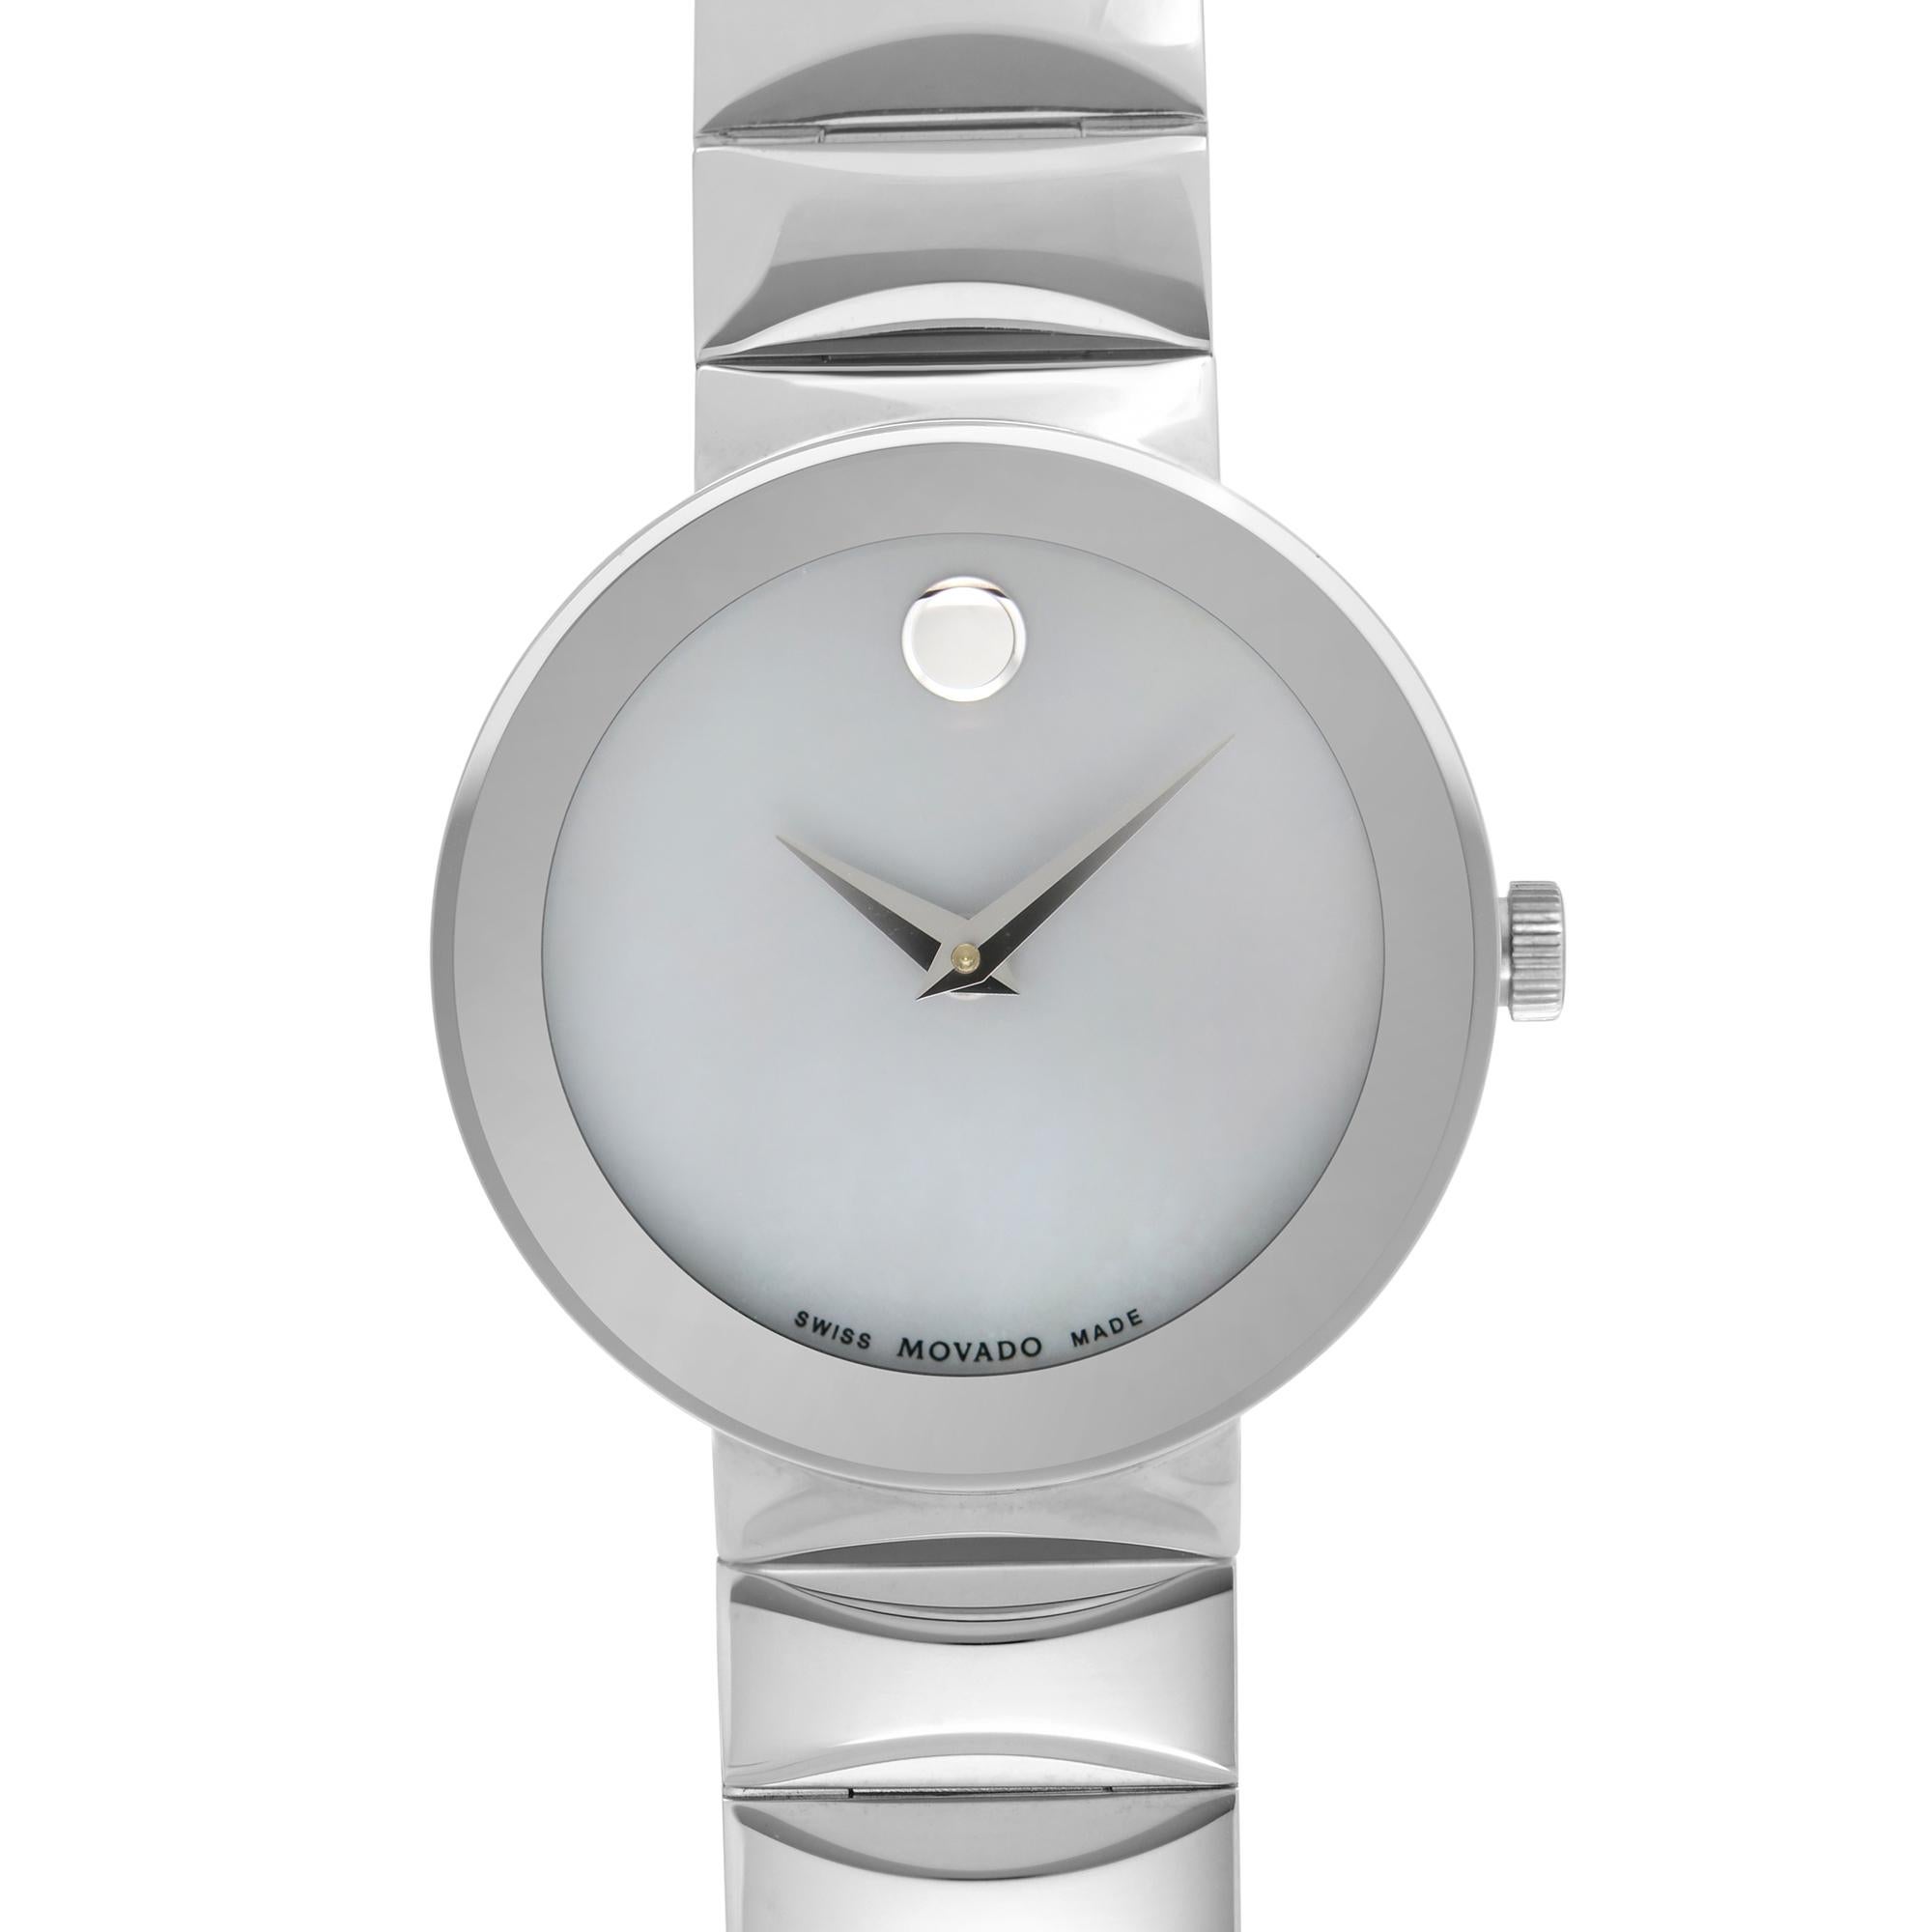 Display Model Movado Sapphire Grey Mother of Pearl Dial Ladies Watch 0607048. This Beautiful Timepiece  Stainless Steel Case and Bracelet, Fixed Stainless Steel Bezel, Mother Of Pearl Dial with Silver-Tone Hands, And No Hour Markers. Comes with